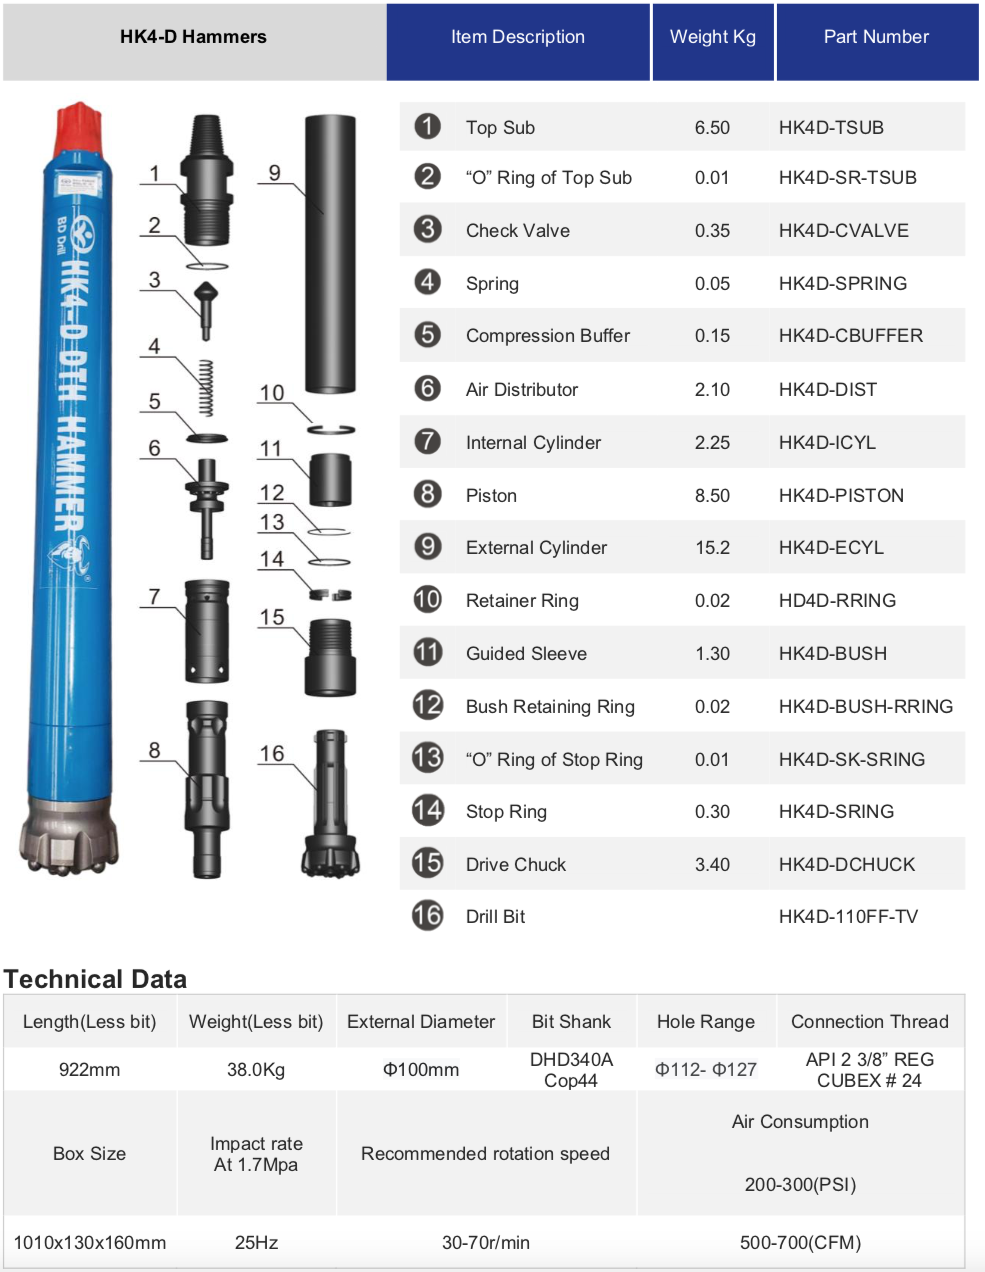 Black Diamond Drilling HK4-D DTH Down the Hole Hammer schematic parts list and technical data